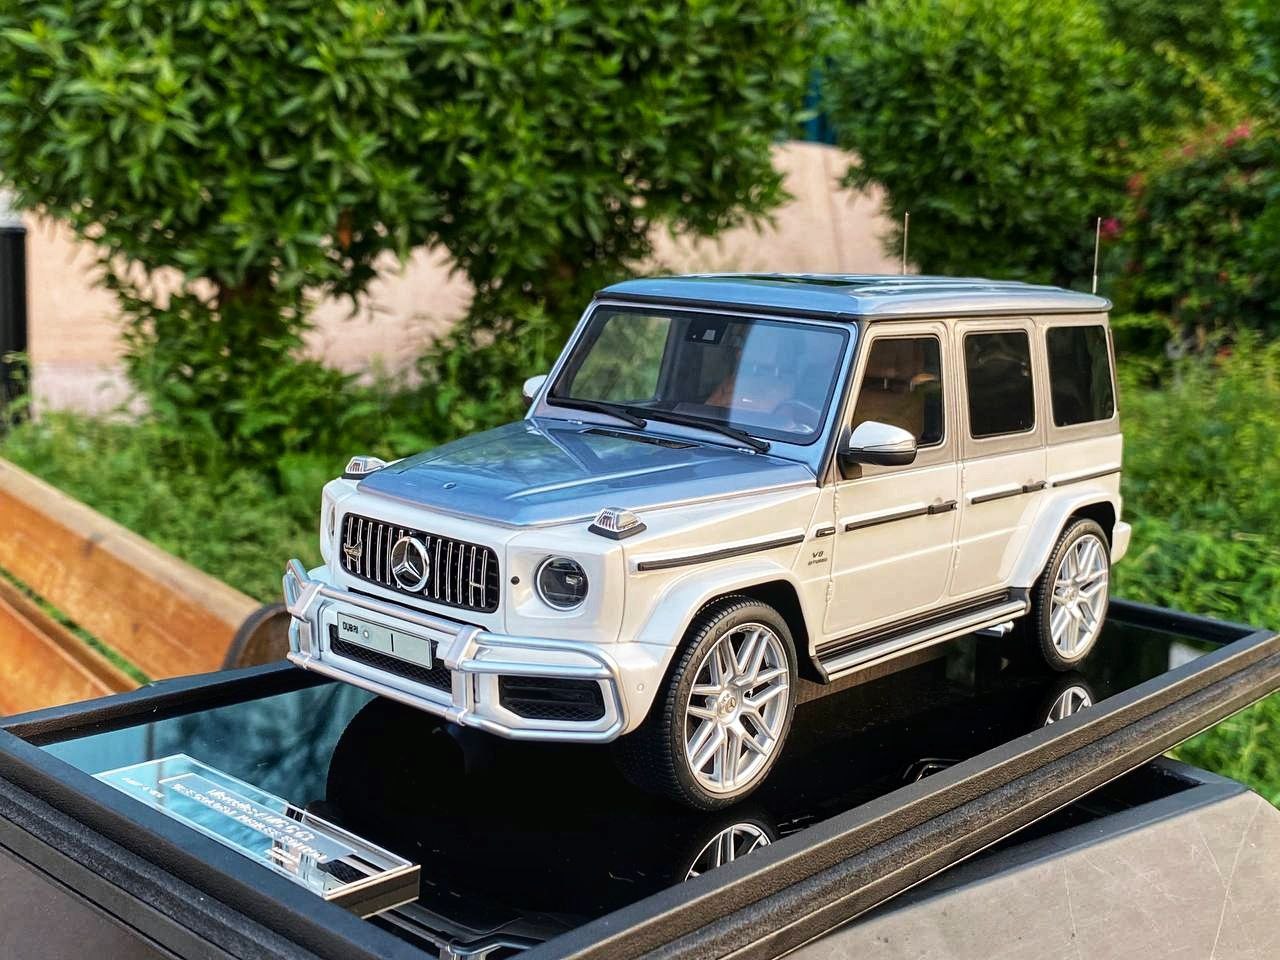 Exclusive Mercedes-Benz AMG G-63 UAE Golden Jubilee Edition by Motor Helix|Sold in Dturman.com Dubai UAE.